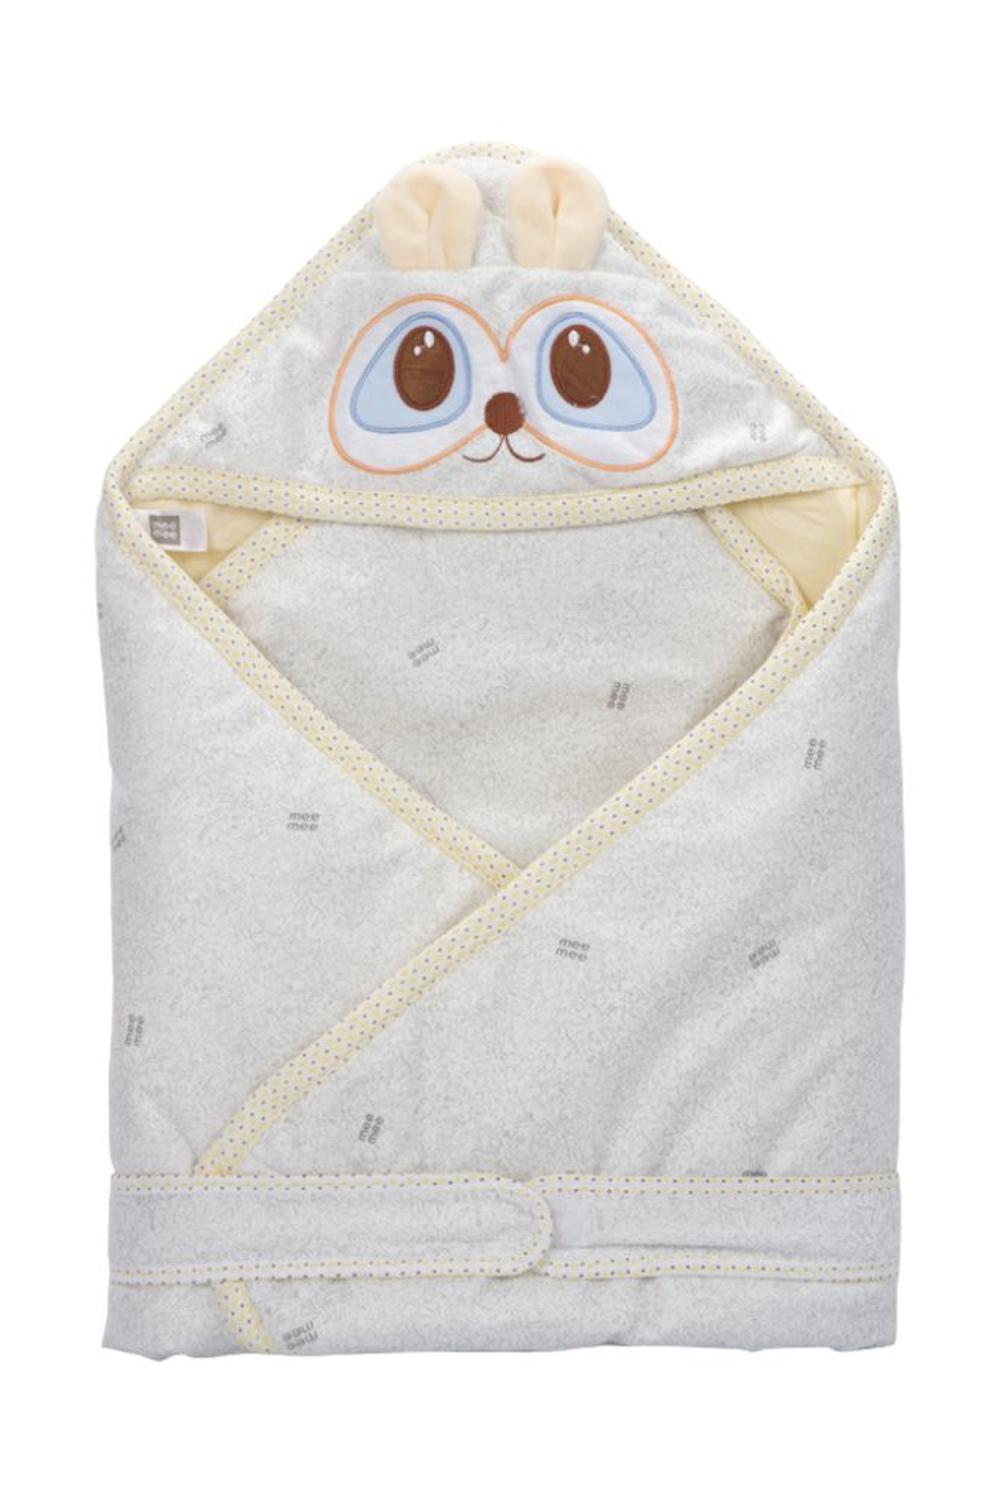 Mee Mee Baby Wrapper Blanket with Hood (Cozy Cocoon, Cream - Owl Patch)